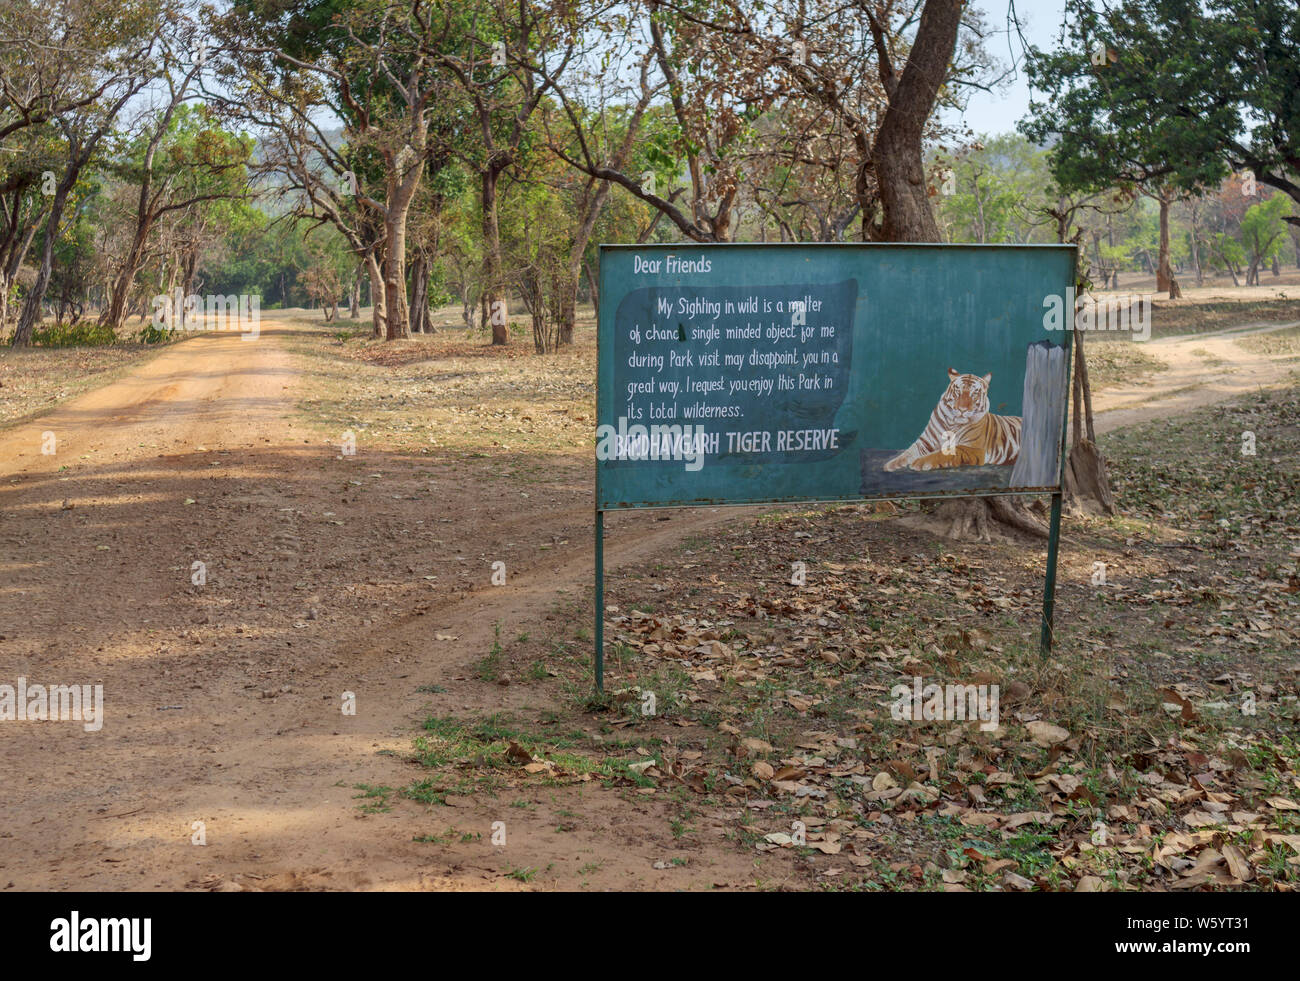 Sign at the Tala Gate entrance to Bandhavgarh Tiger Reserve in the National Park, Umaria district of the central Indian state of Madhya Pradesh Stock Photo